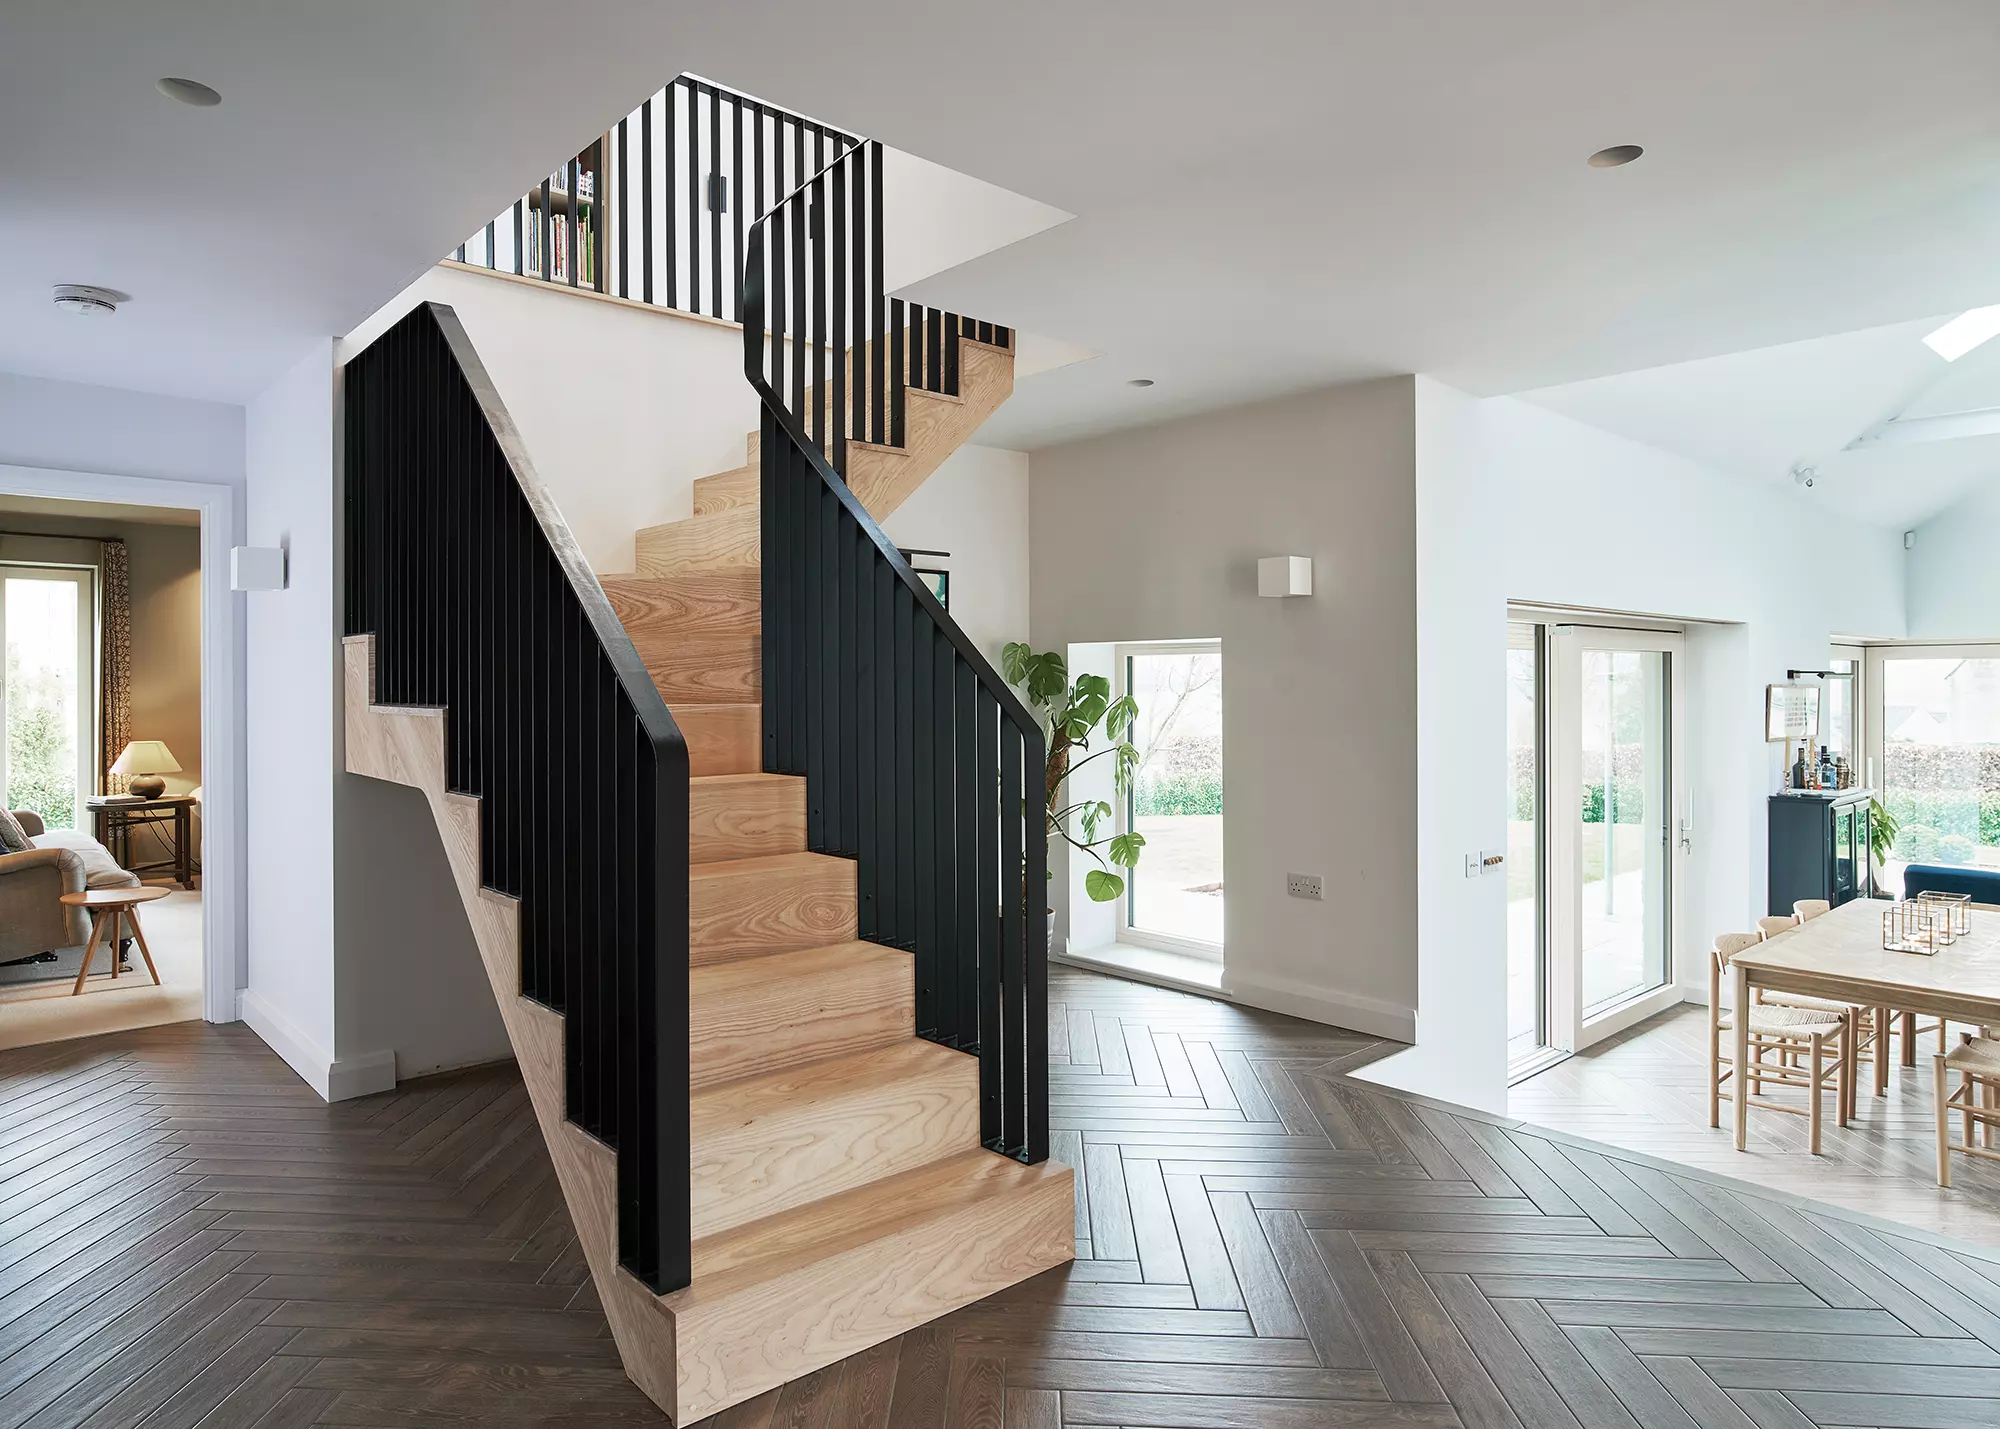 26 Staircase Ideas: How to Plan & Design Your Perfect Staircase